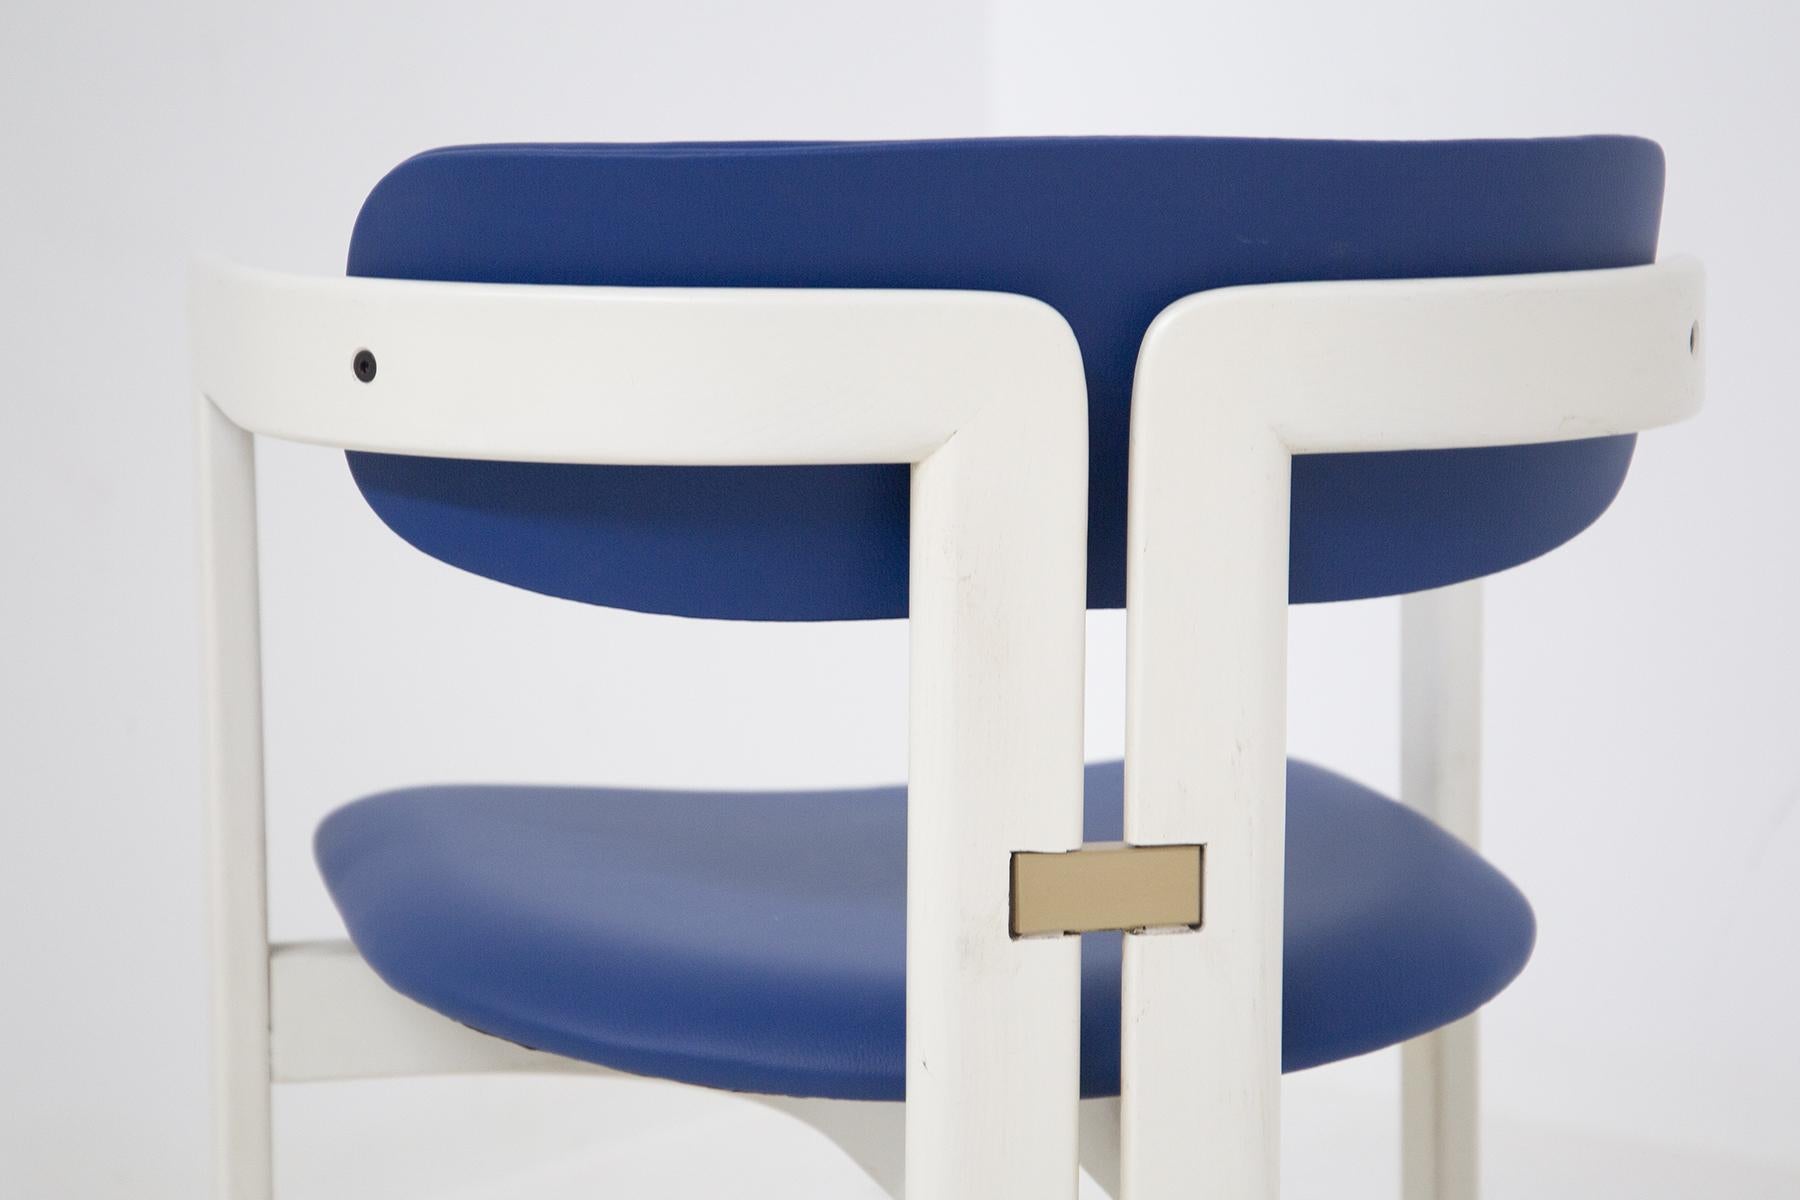 Beautiful set of dining chairs designed by Augusto Savini for the fine Italian manufacturer Pozzi in the 1970s. The chairs are called 'Pamplona'.
The original upholstery is blue leather and the organically shaped frames are made entirely of white